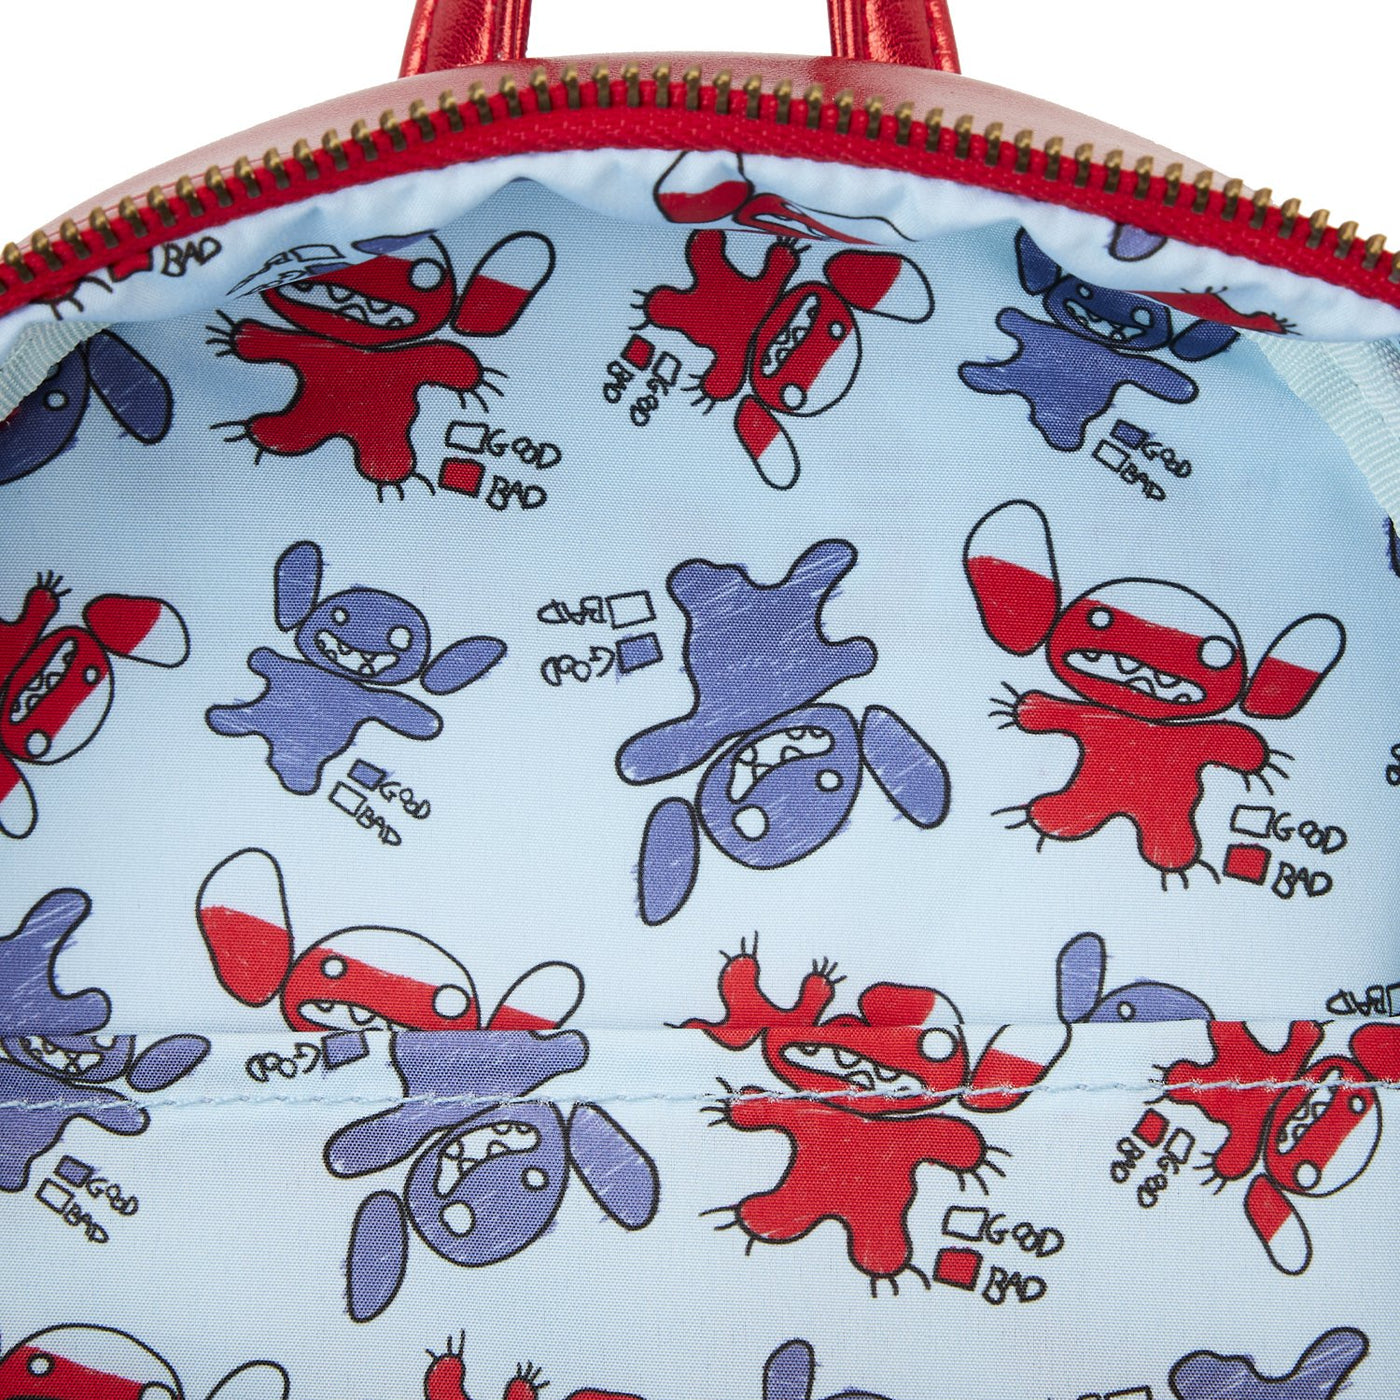 Loungefly Mickey Mouse Devil Mini Backpack